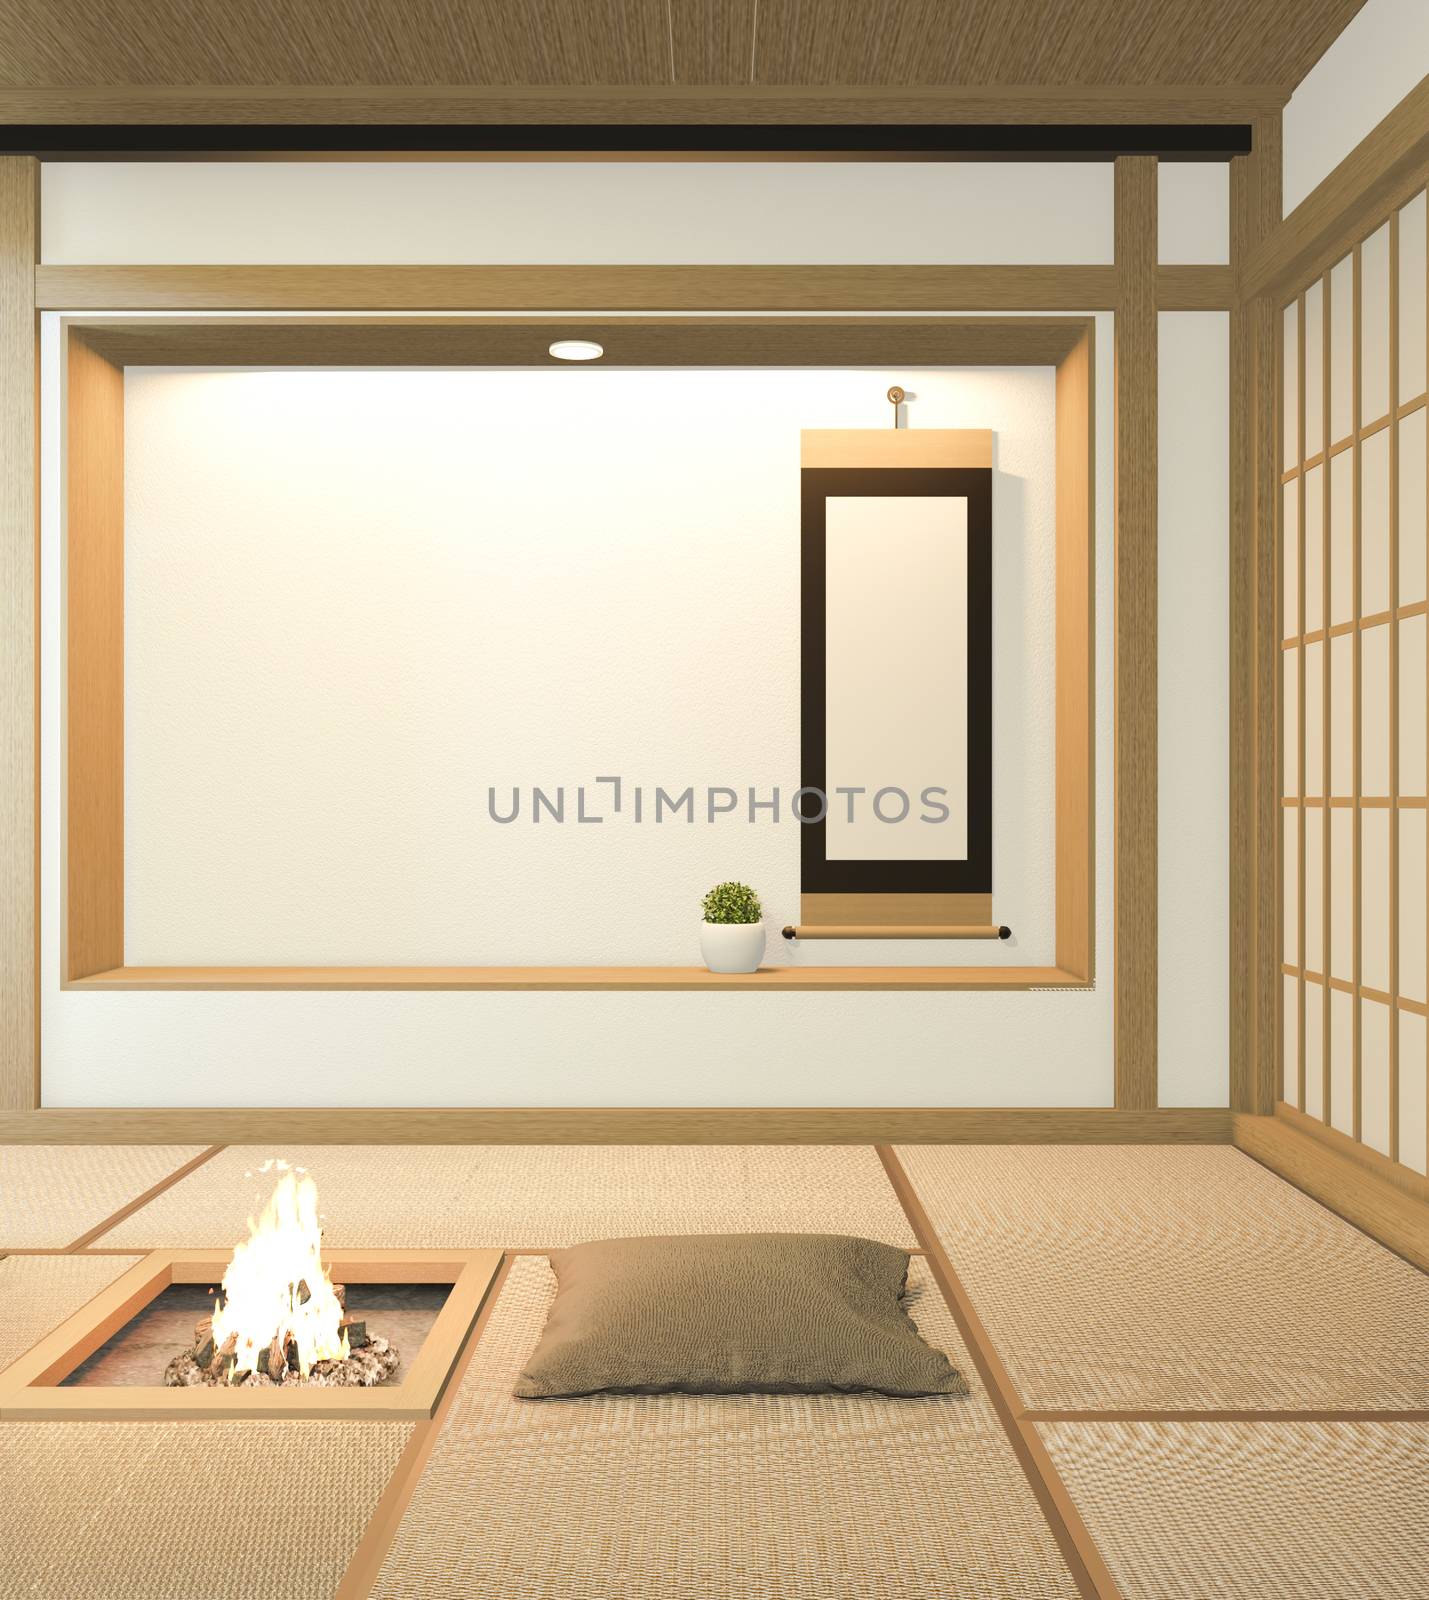 Nihon room design interior with door paper and cabinet shelf wal by Minny0012011@hotmail.com